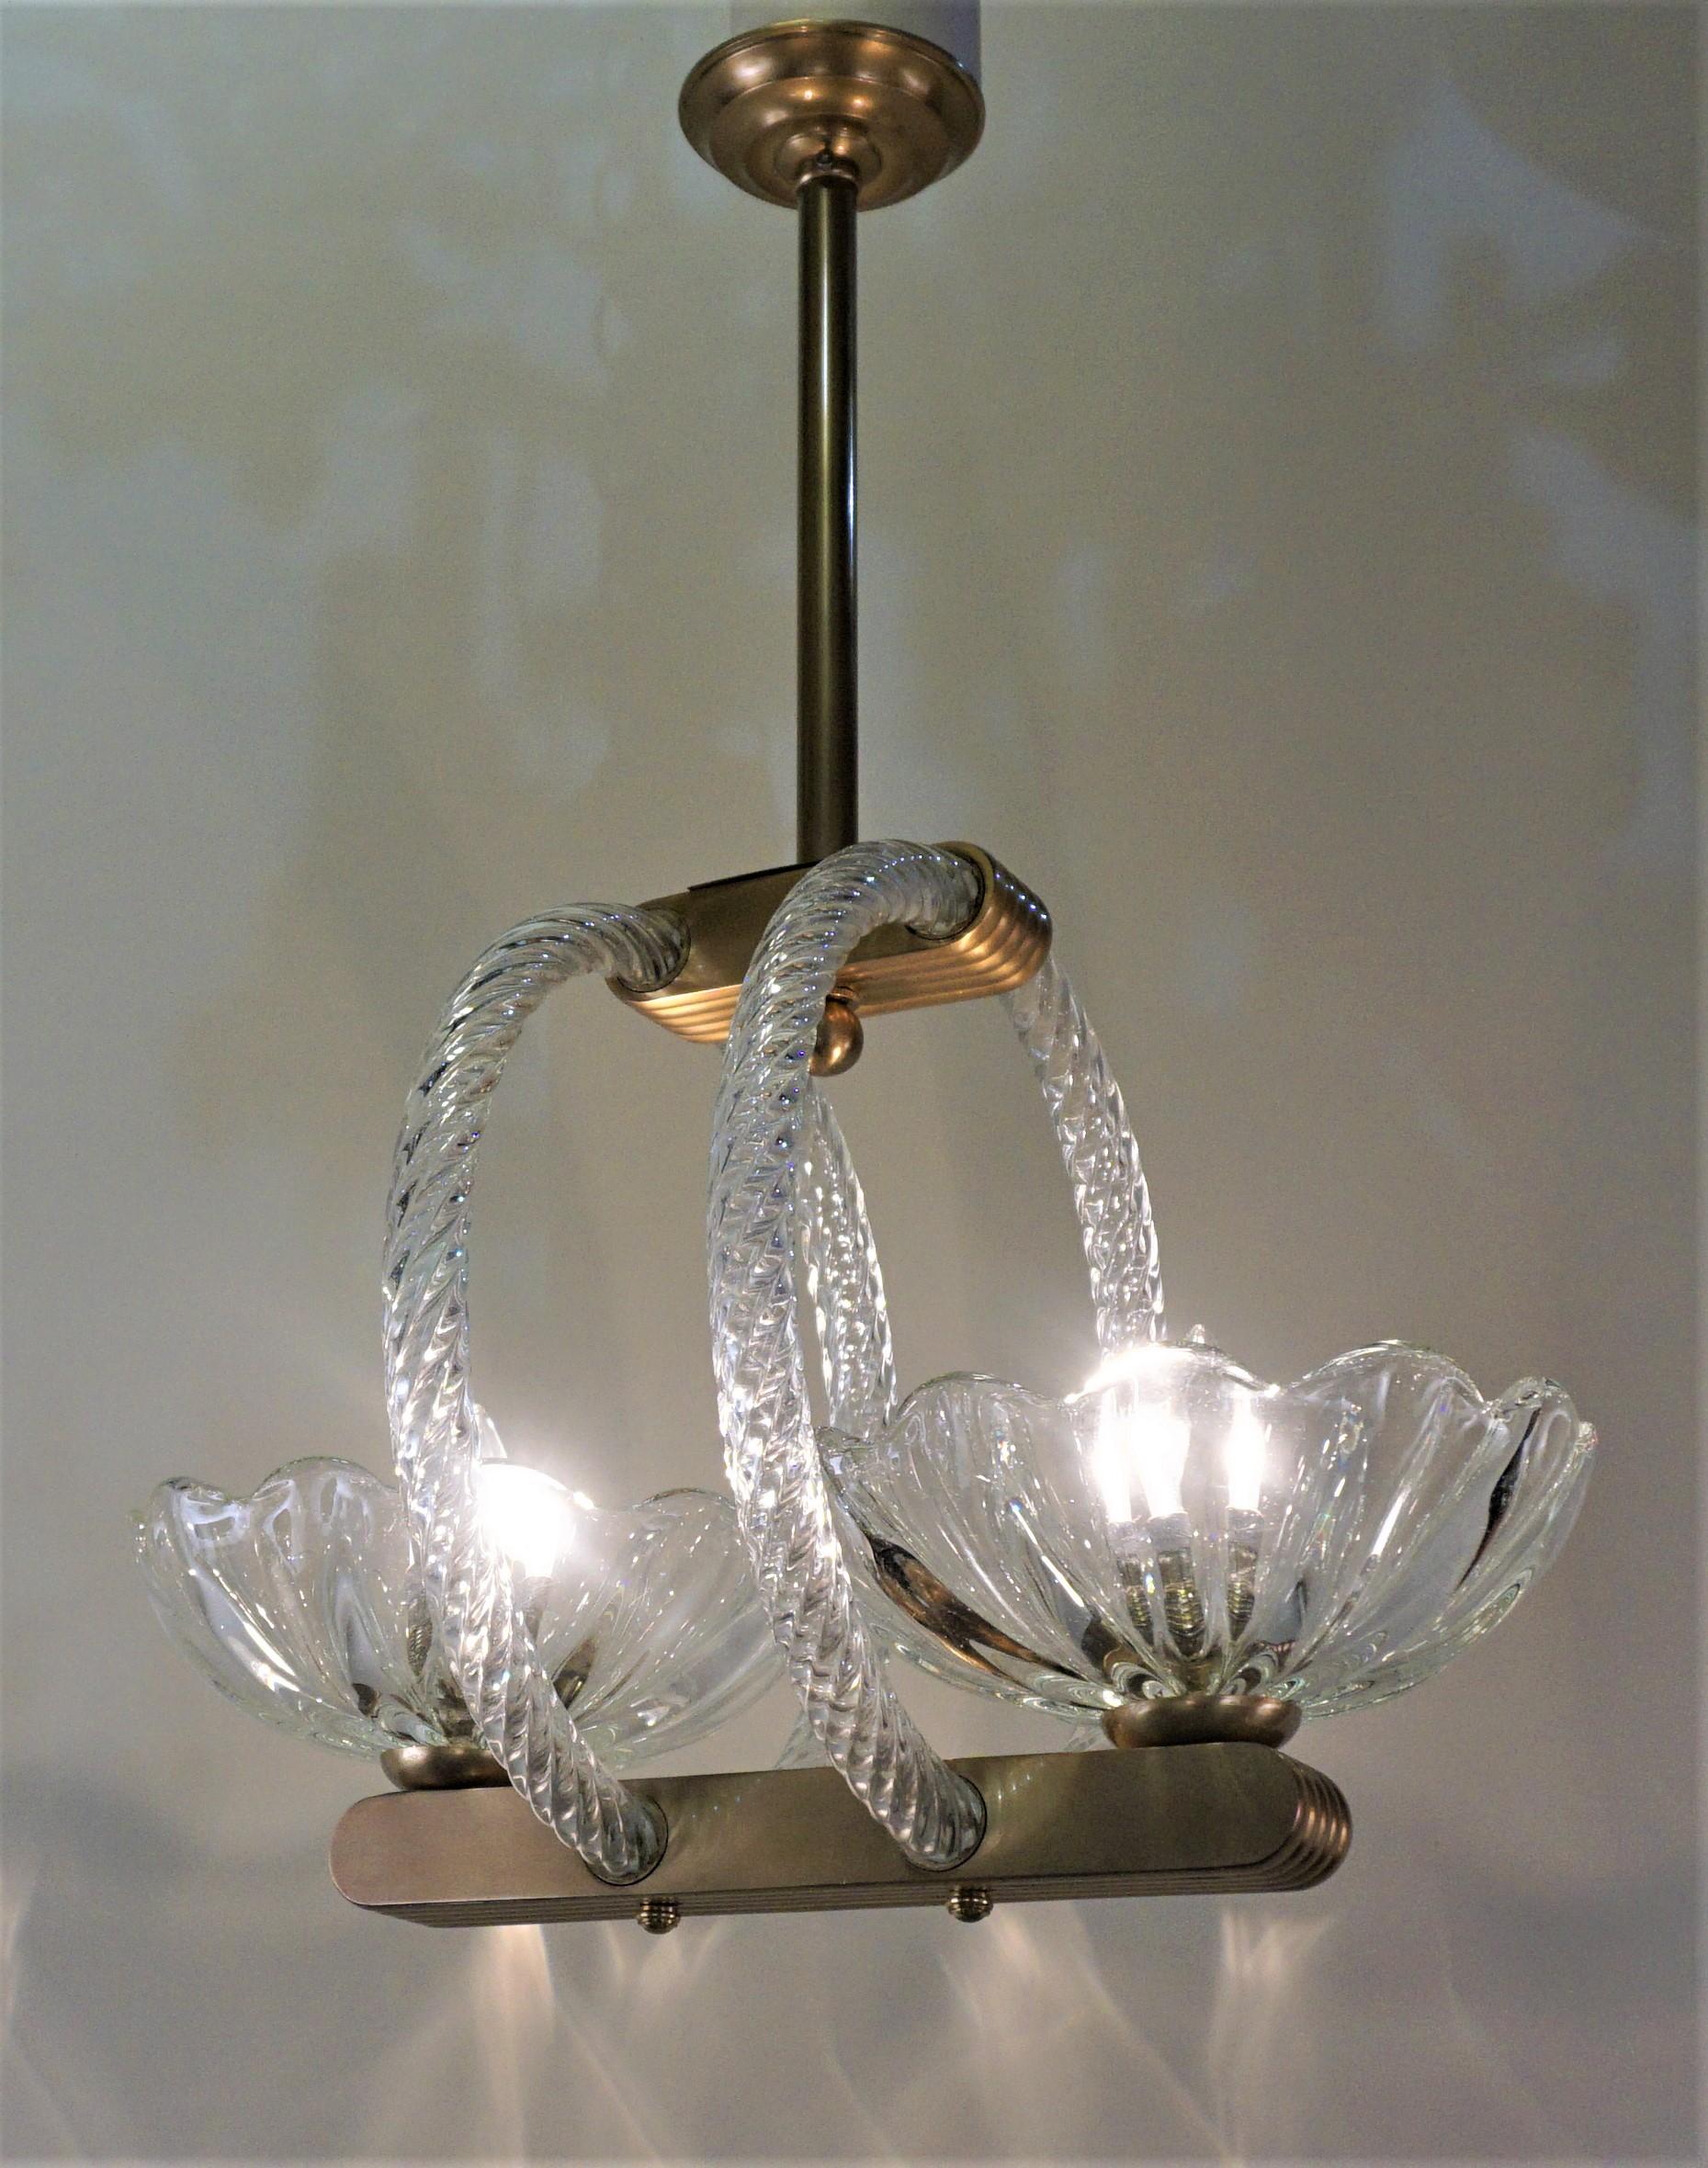 1950s Italian blown glass and brass chandelier by Ercole Barovier for Barovier & Toso.
         